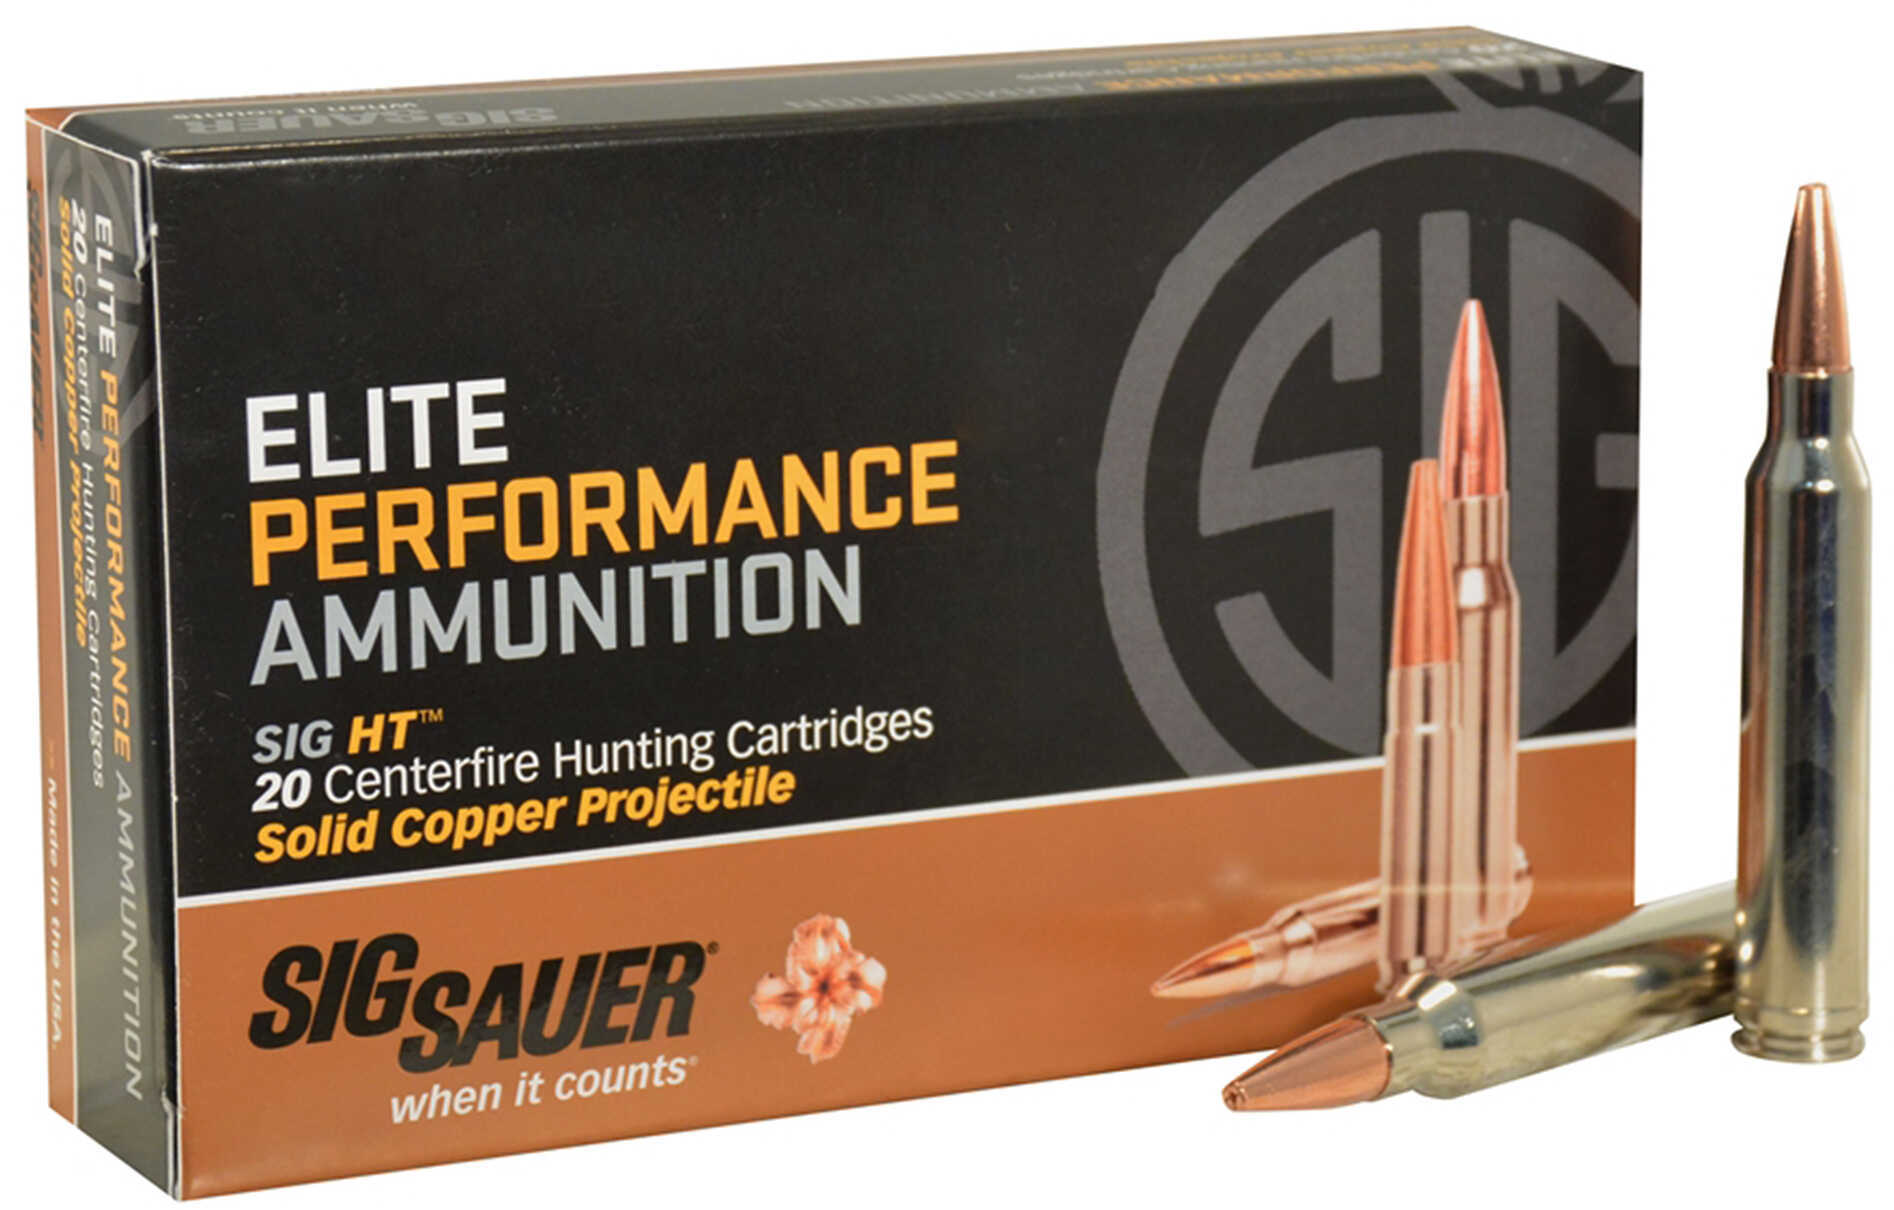 300 Win Mag 165 Grain Lead Free 20 Rounds Sig Sauer Ammunition 300 Winchester Magnum